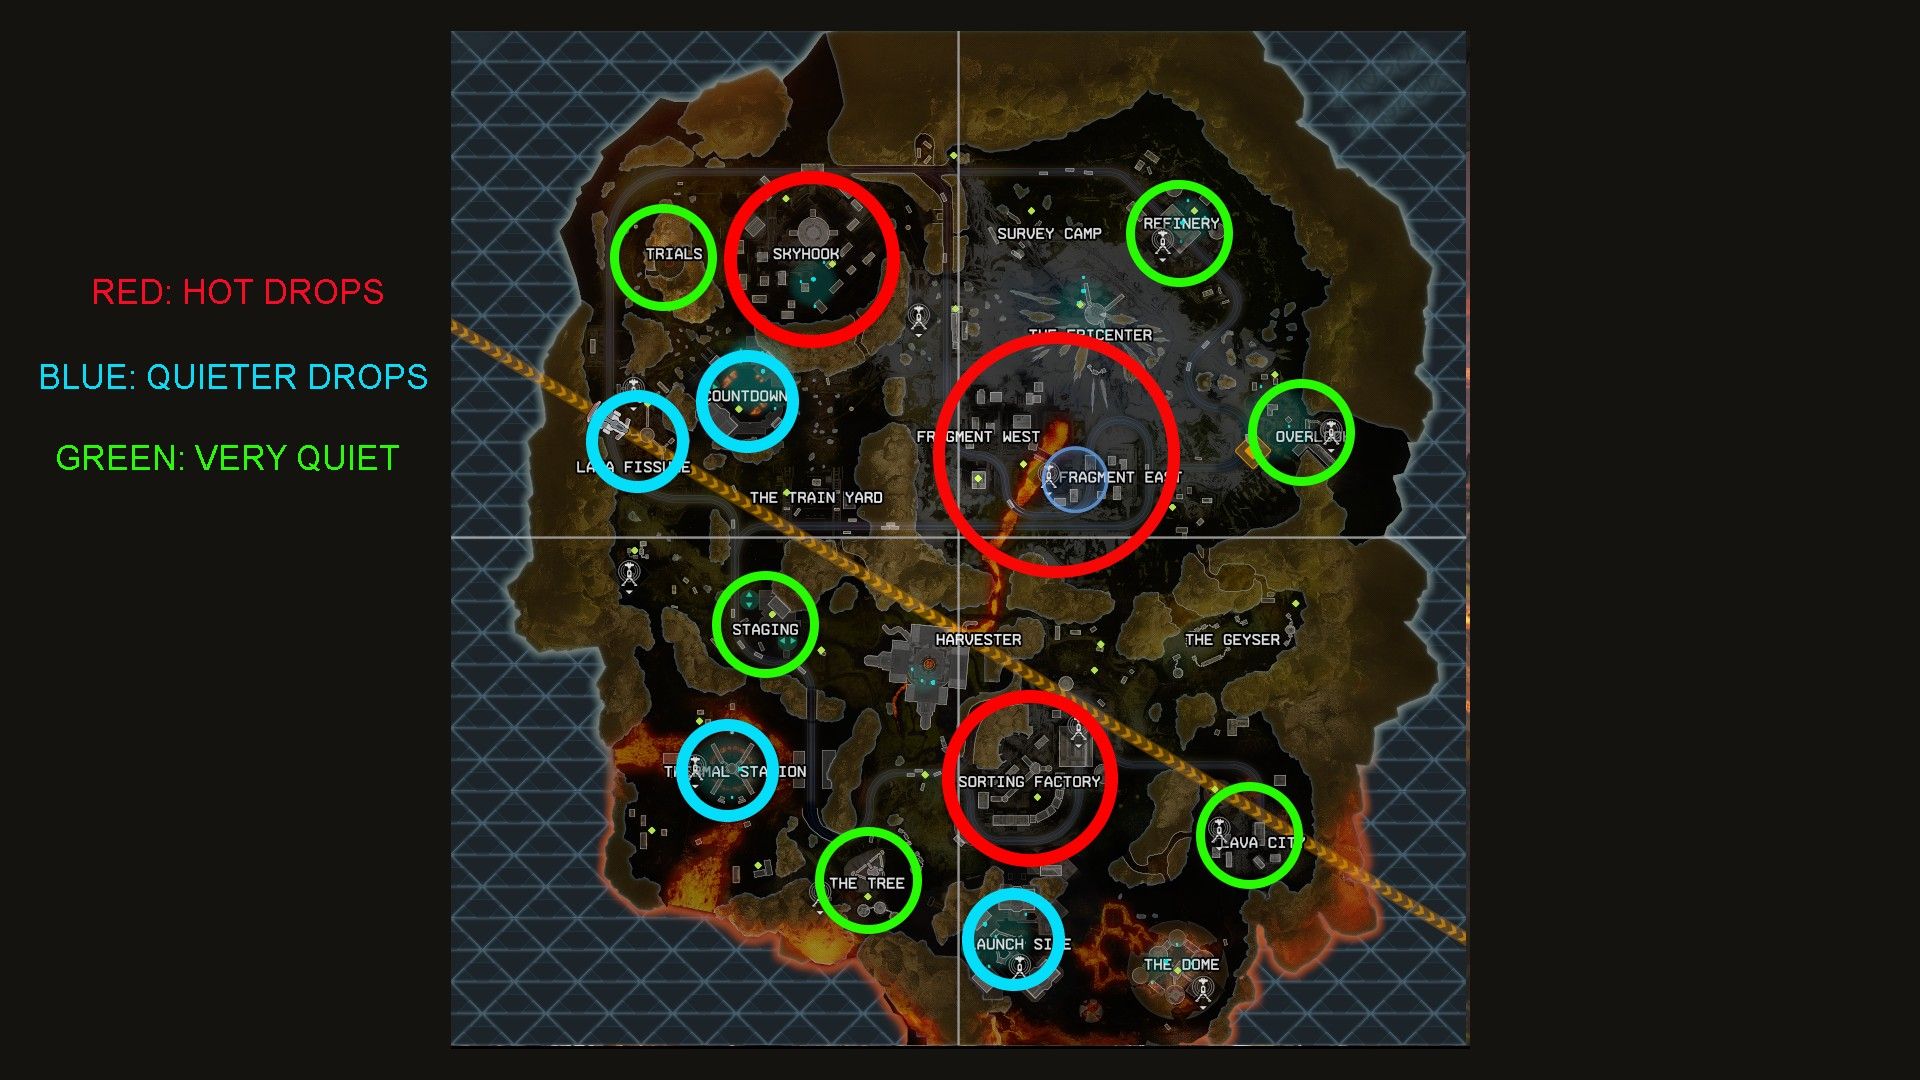 apex legends map with drop spots highlighted